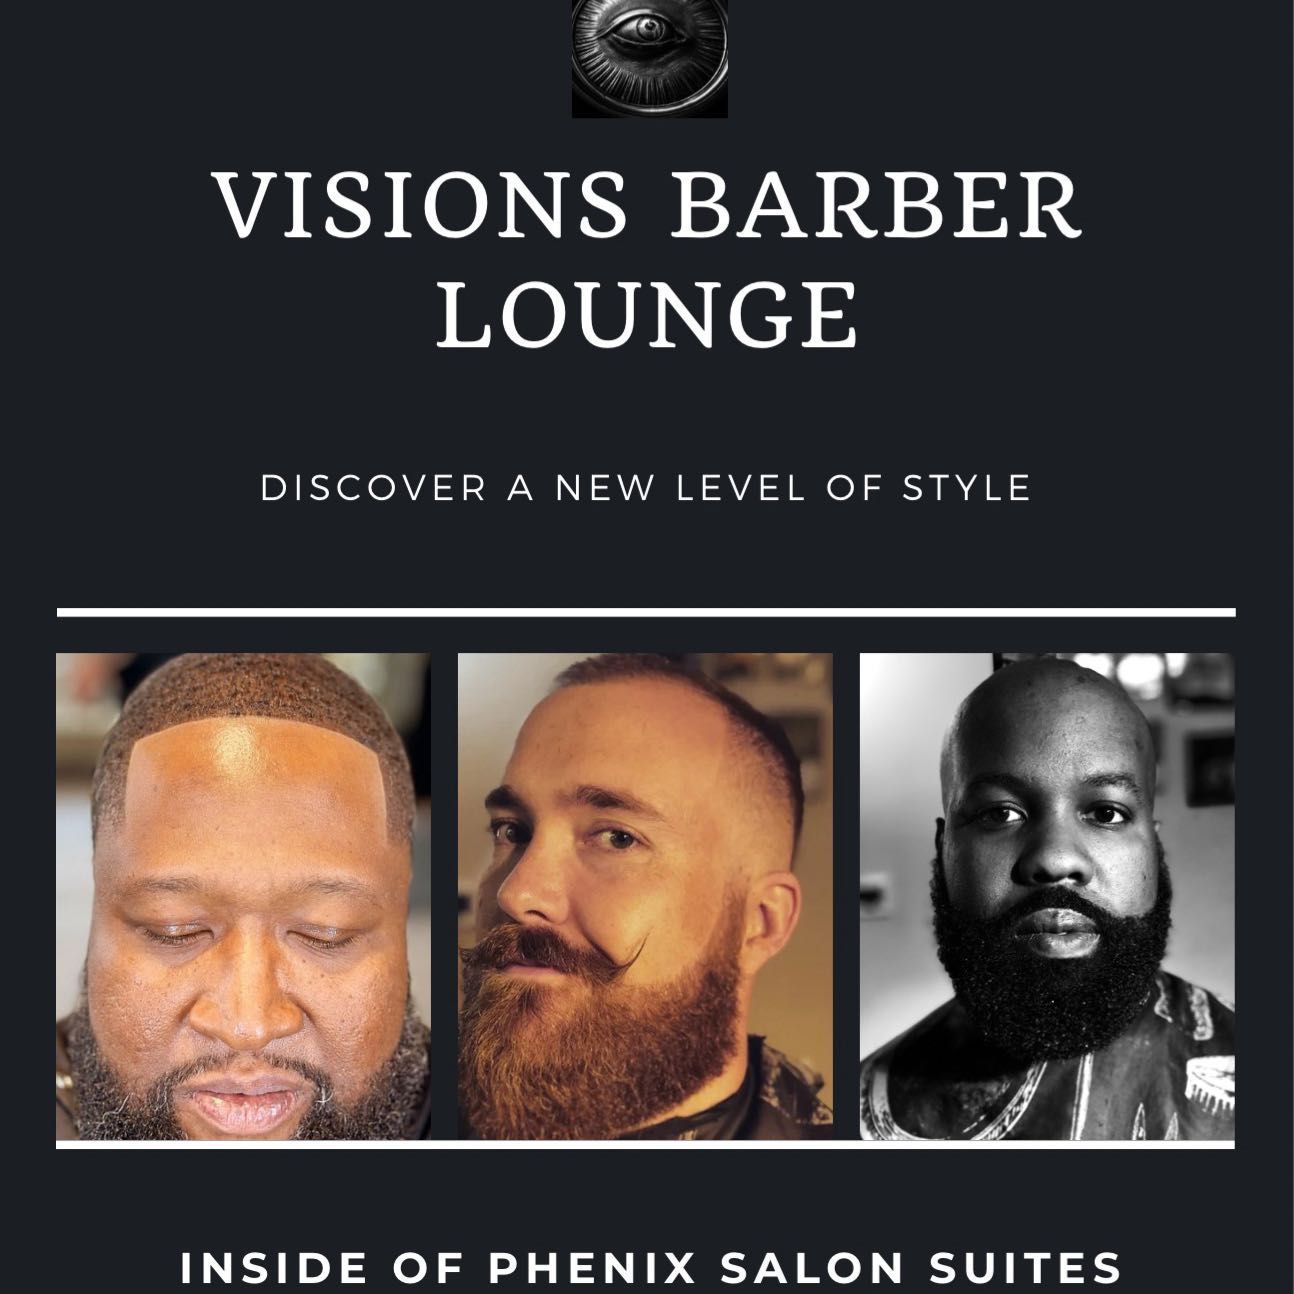 Visions Barber Lounge, 145 Willow Bnd, Suite 110, Crystal, 55428